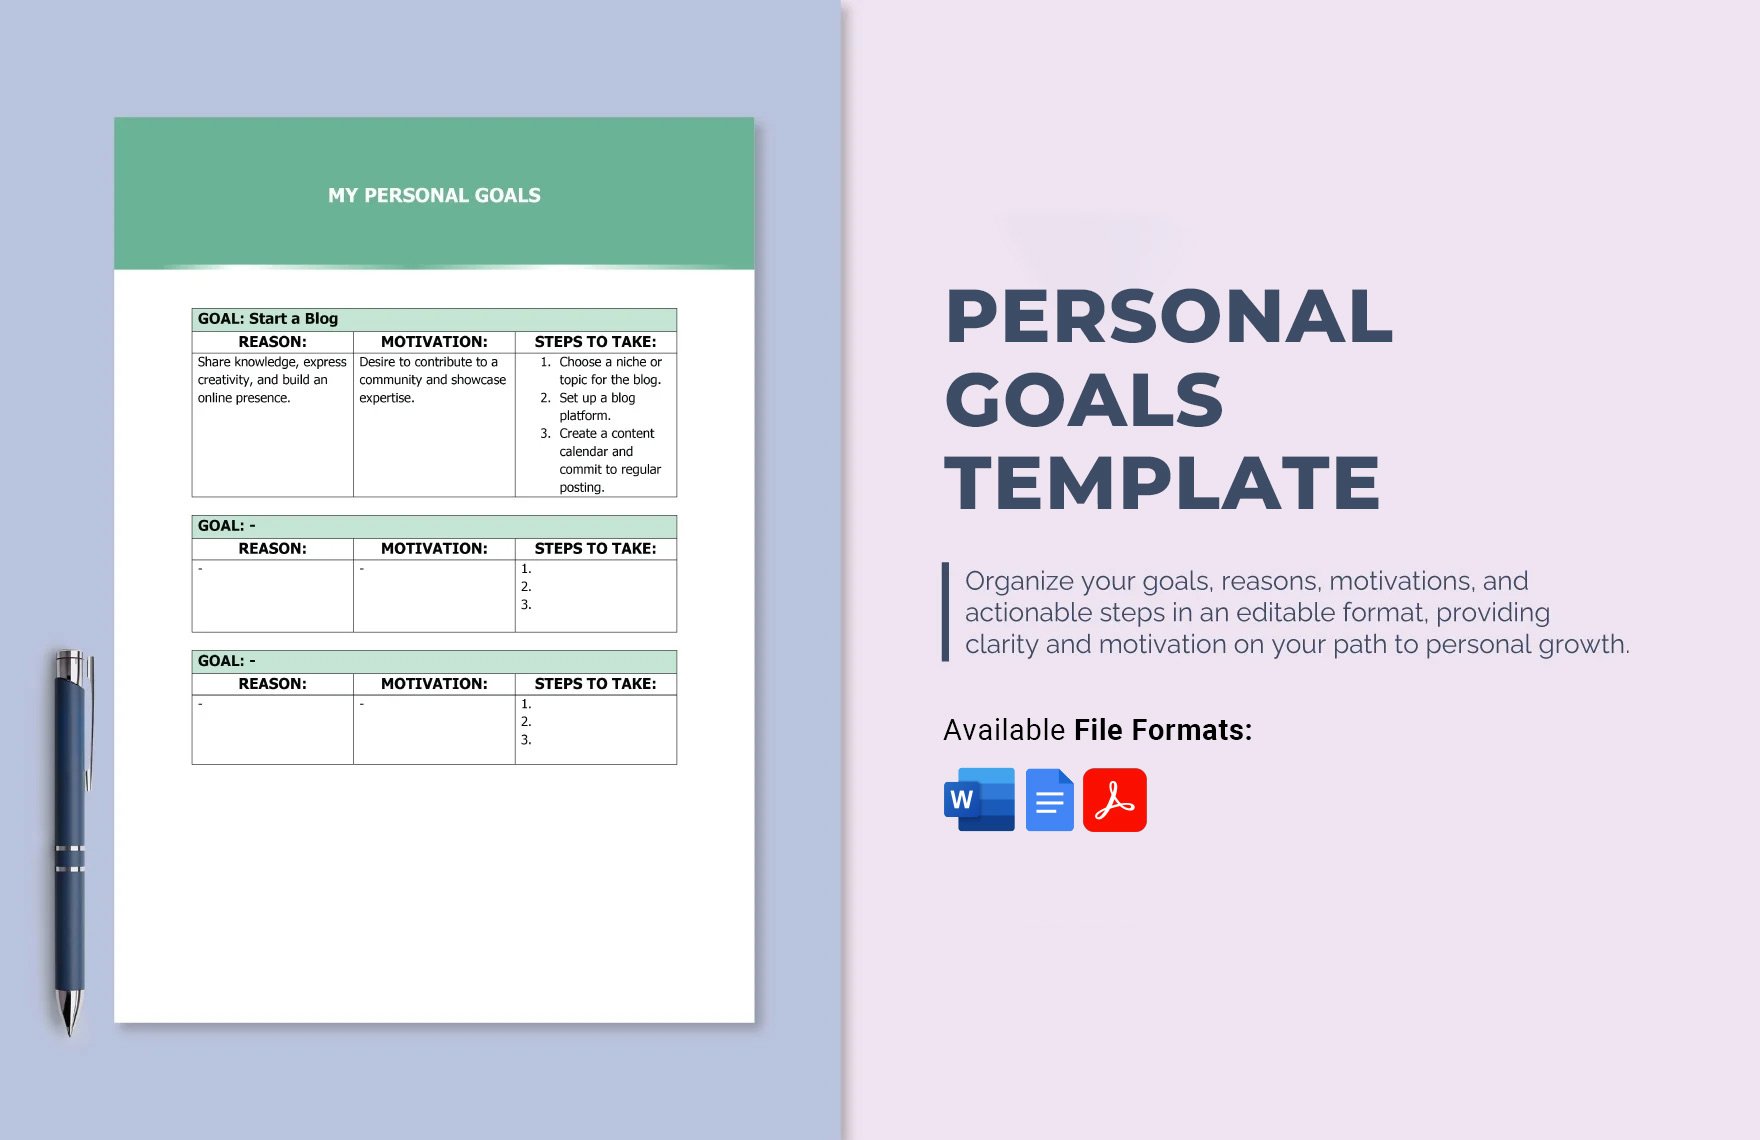 Personal Goals Template